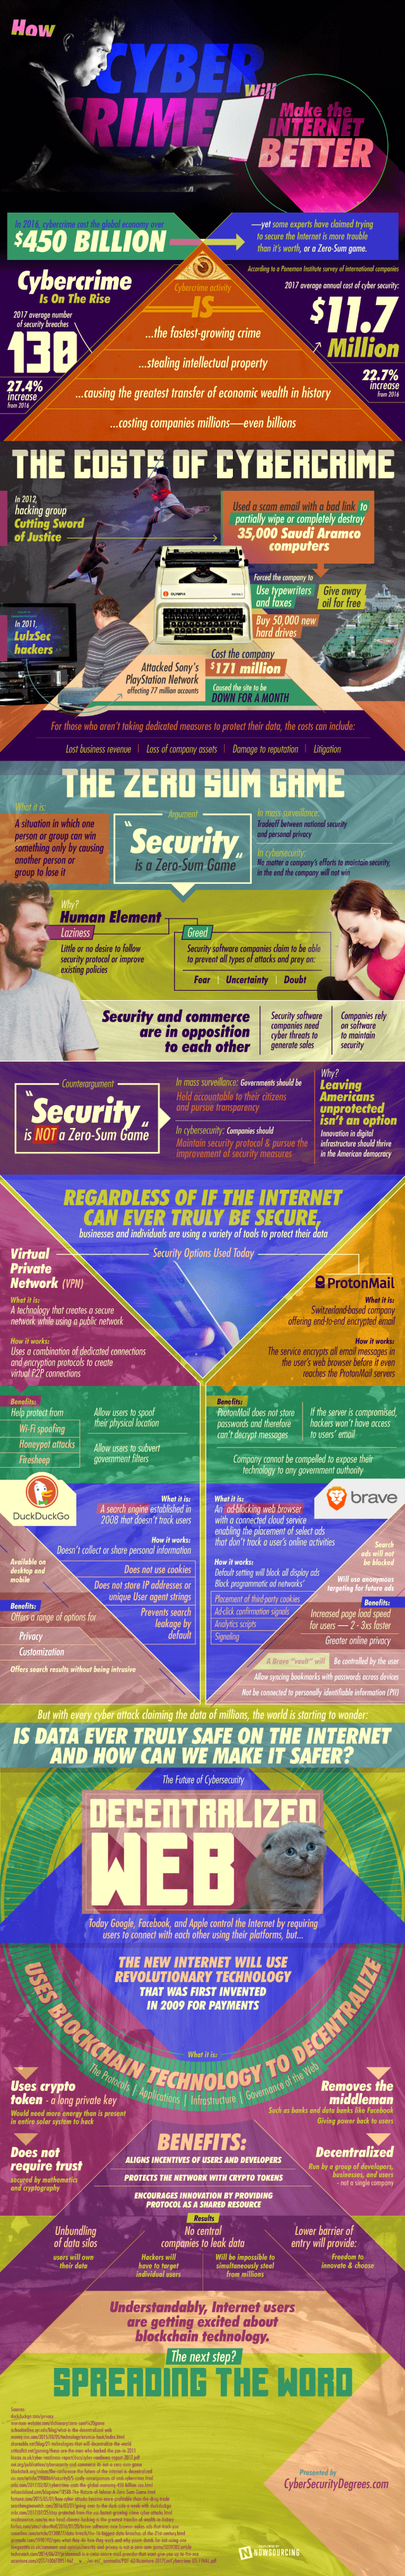 Cyber crime infographic